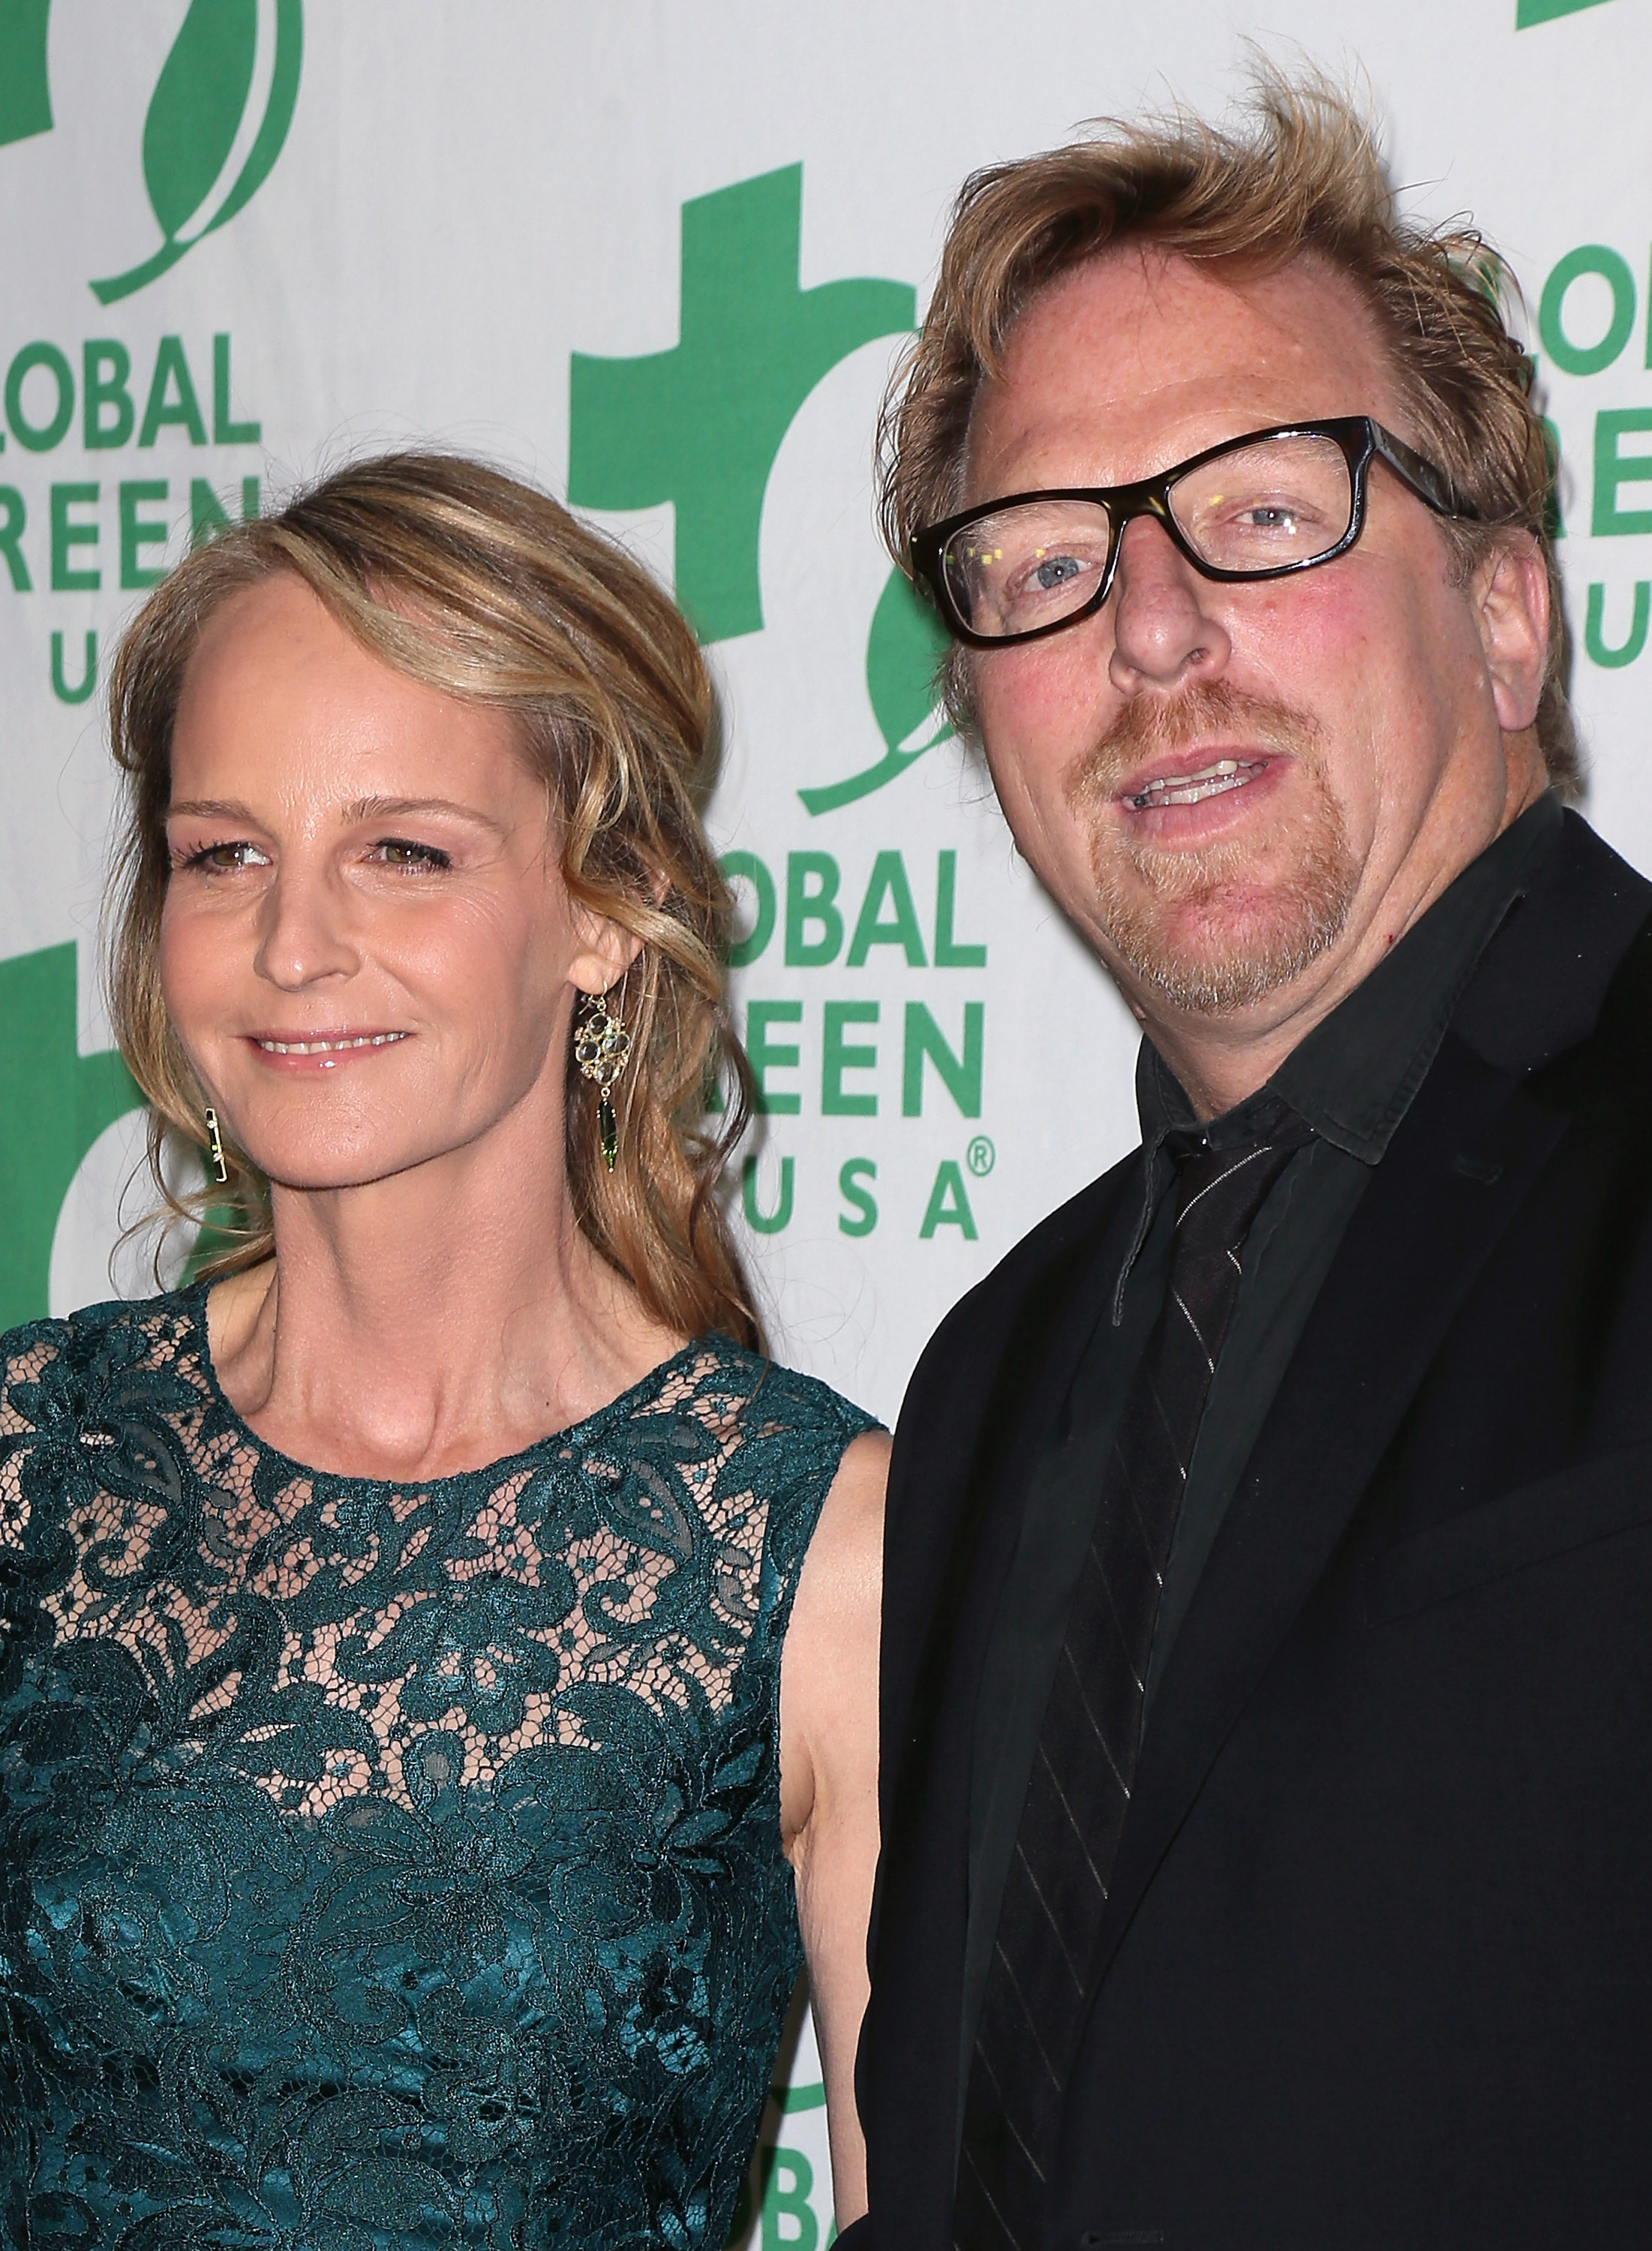 Helen Hunt and Matthew Carnahan at Gobal Green USA's 10th Annual Pre-Oscar Party on February 20, 2013, in Hollywood, California. | Source: Getty Images